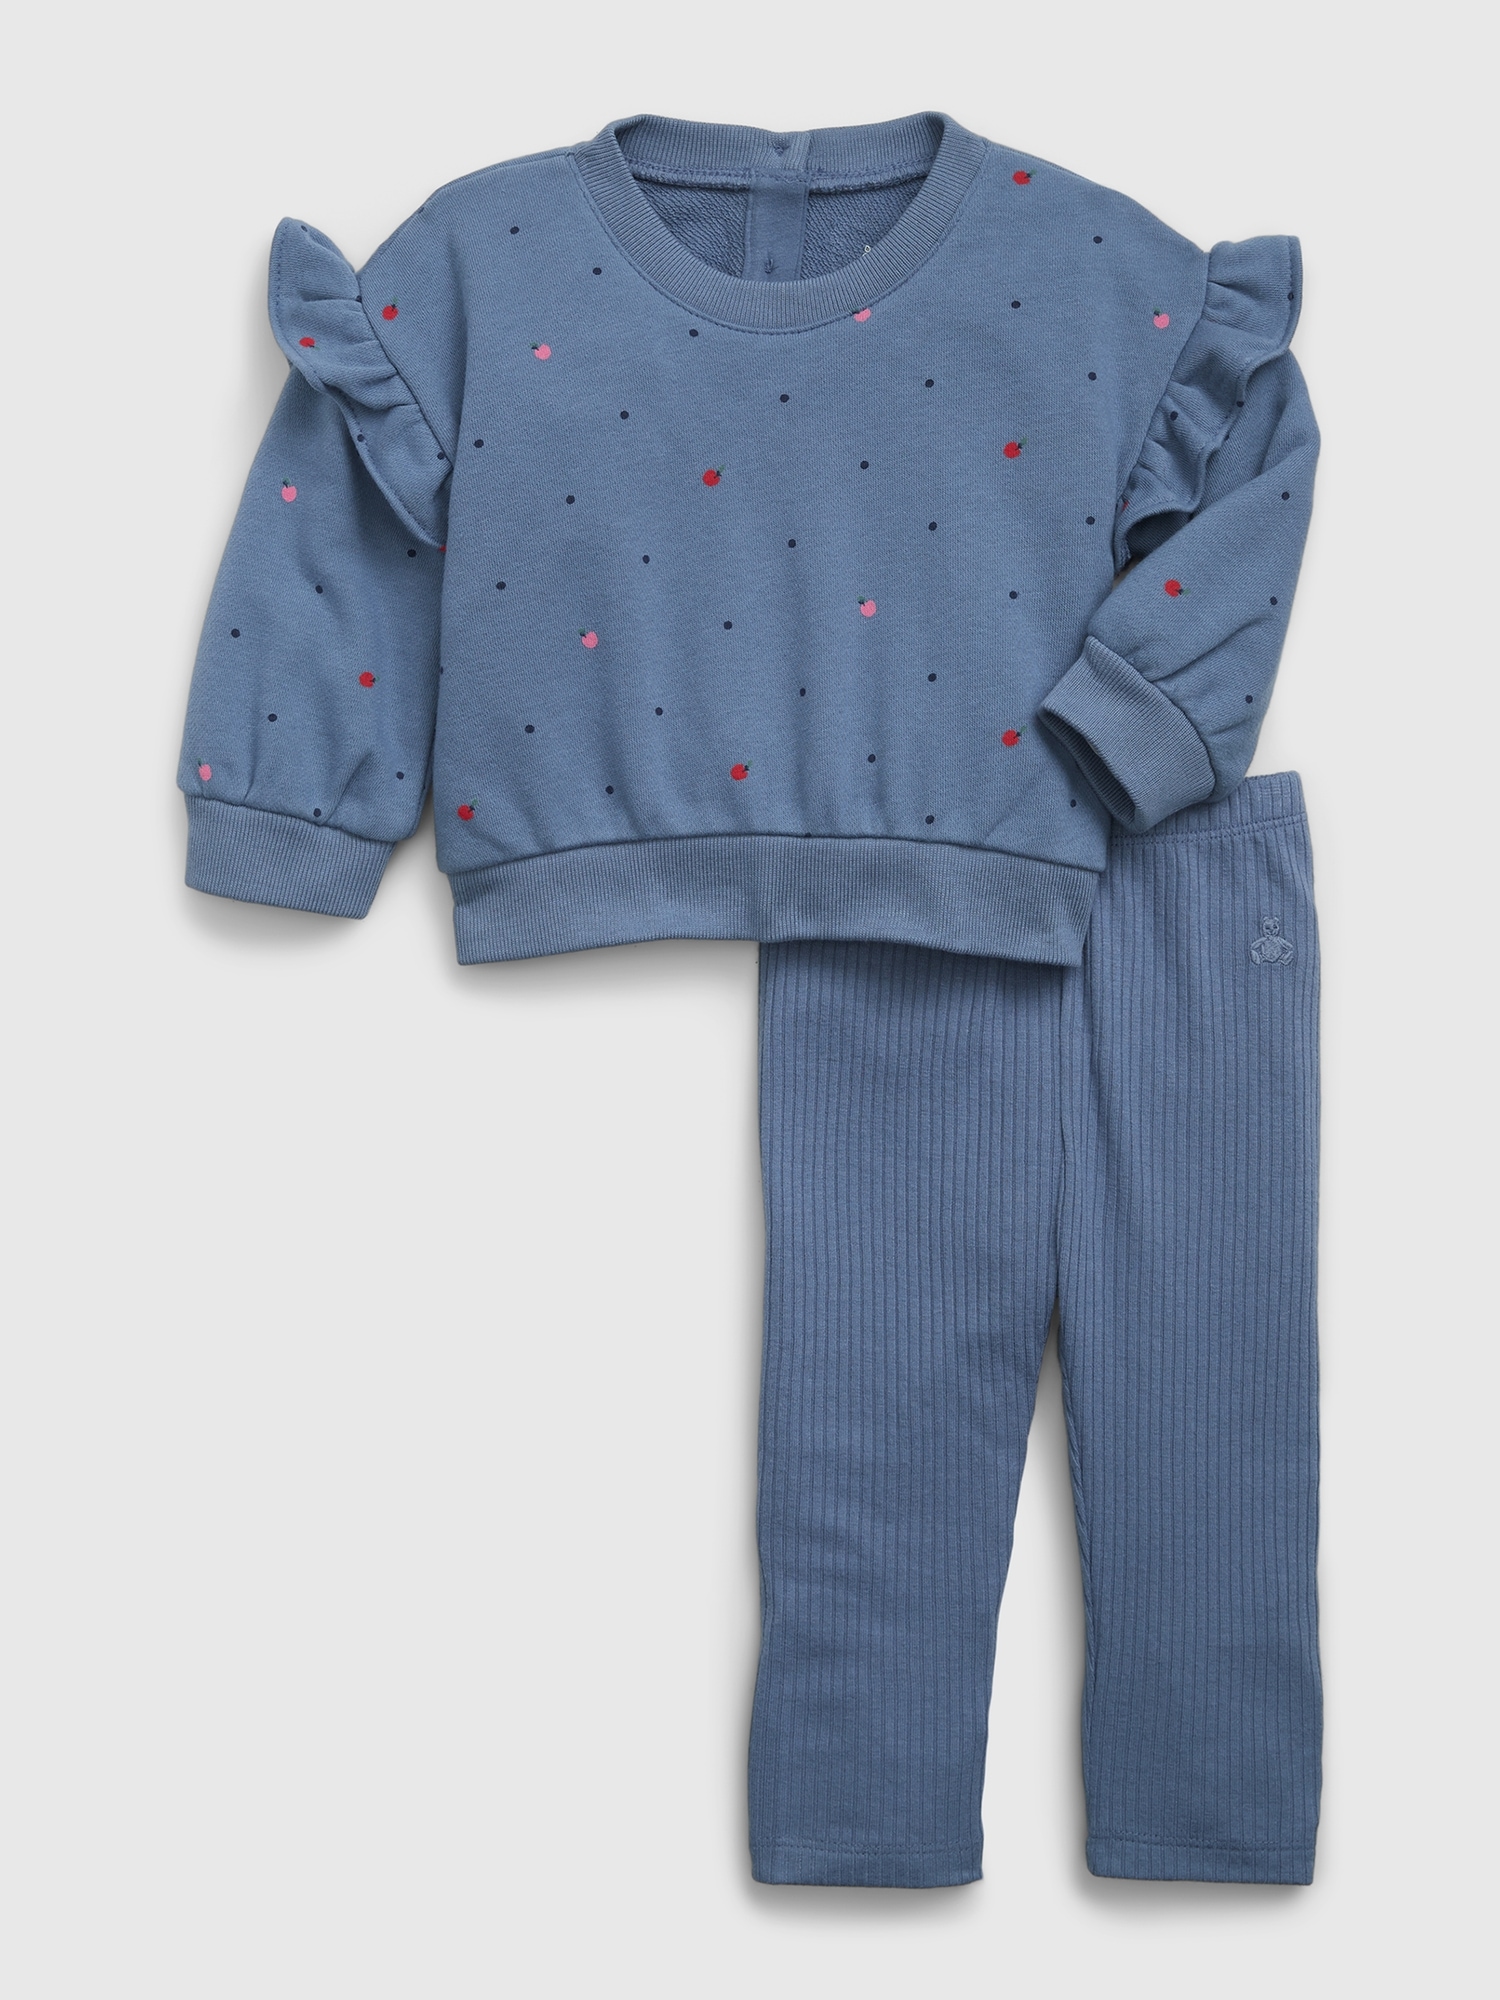 Gap Baby Ruffle Two-Piece Outfit Set